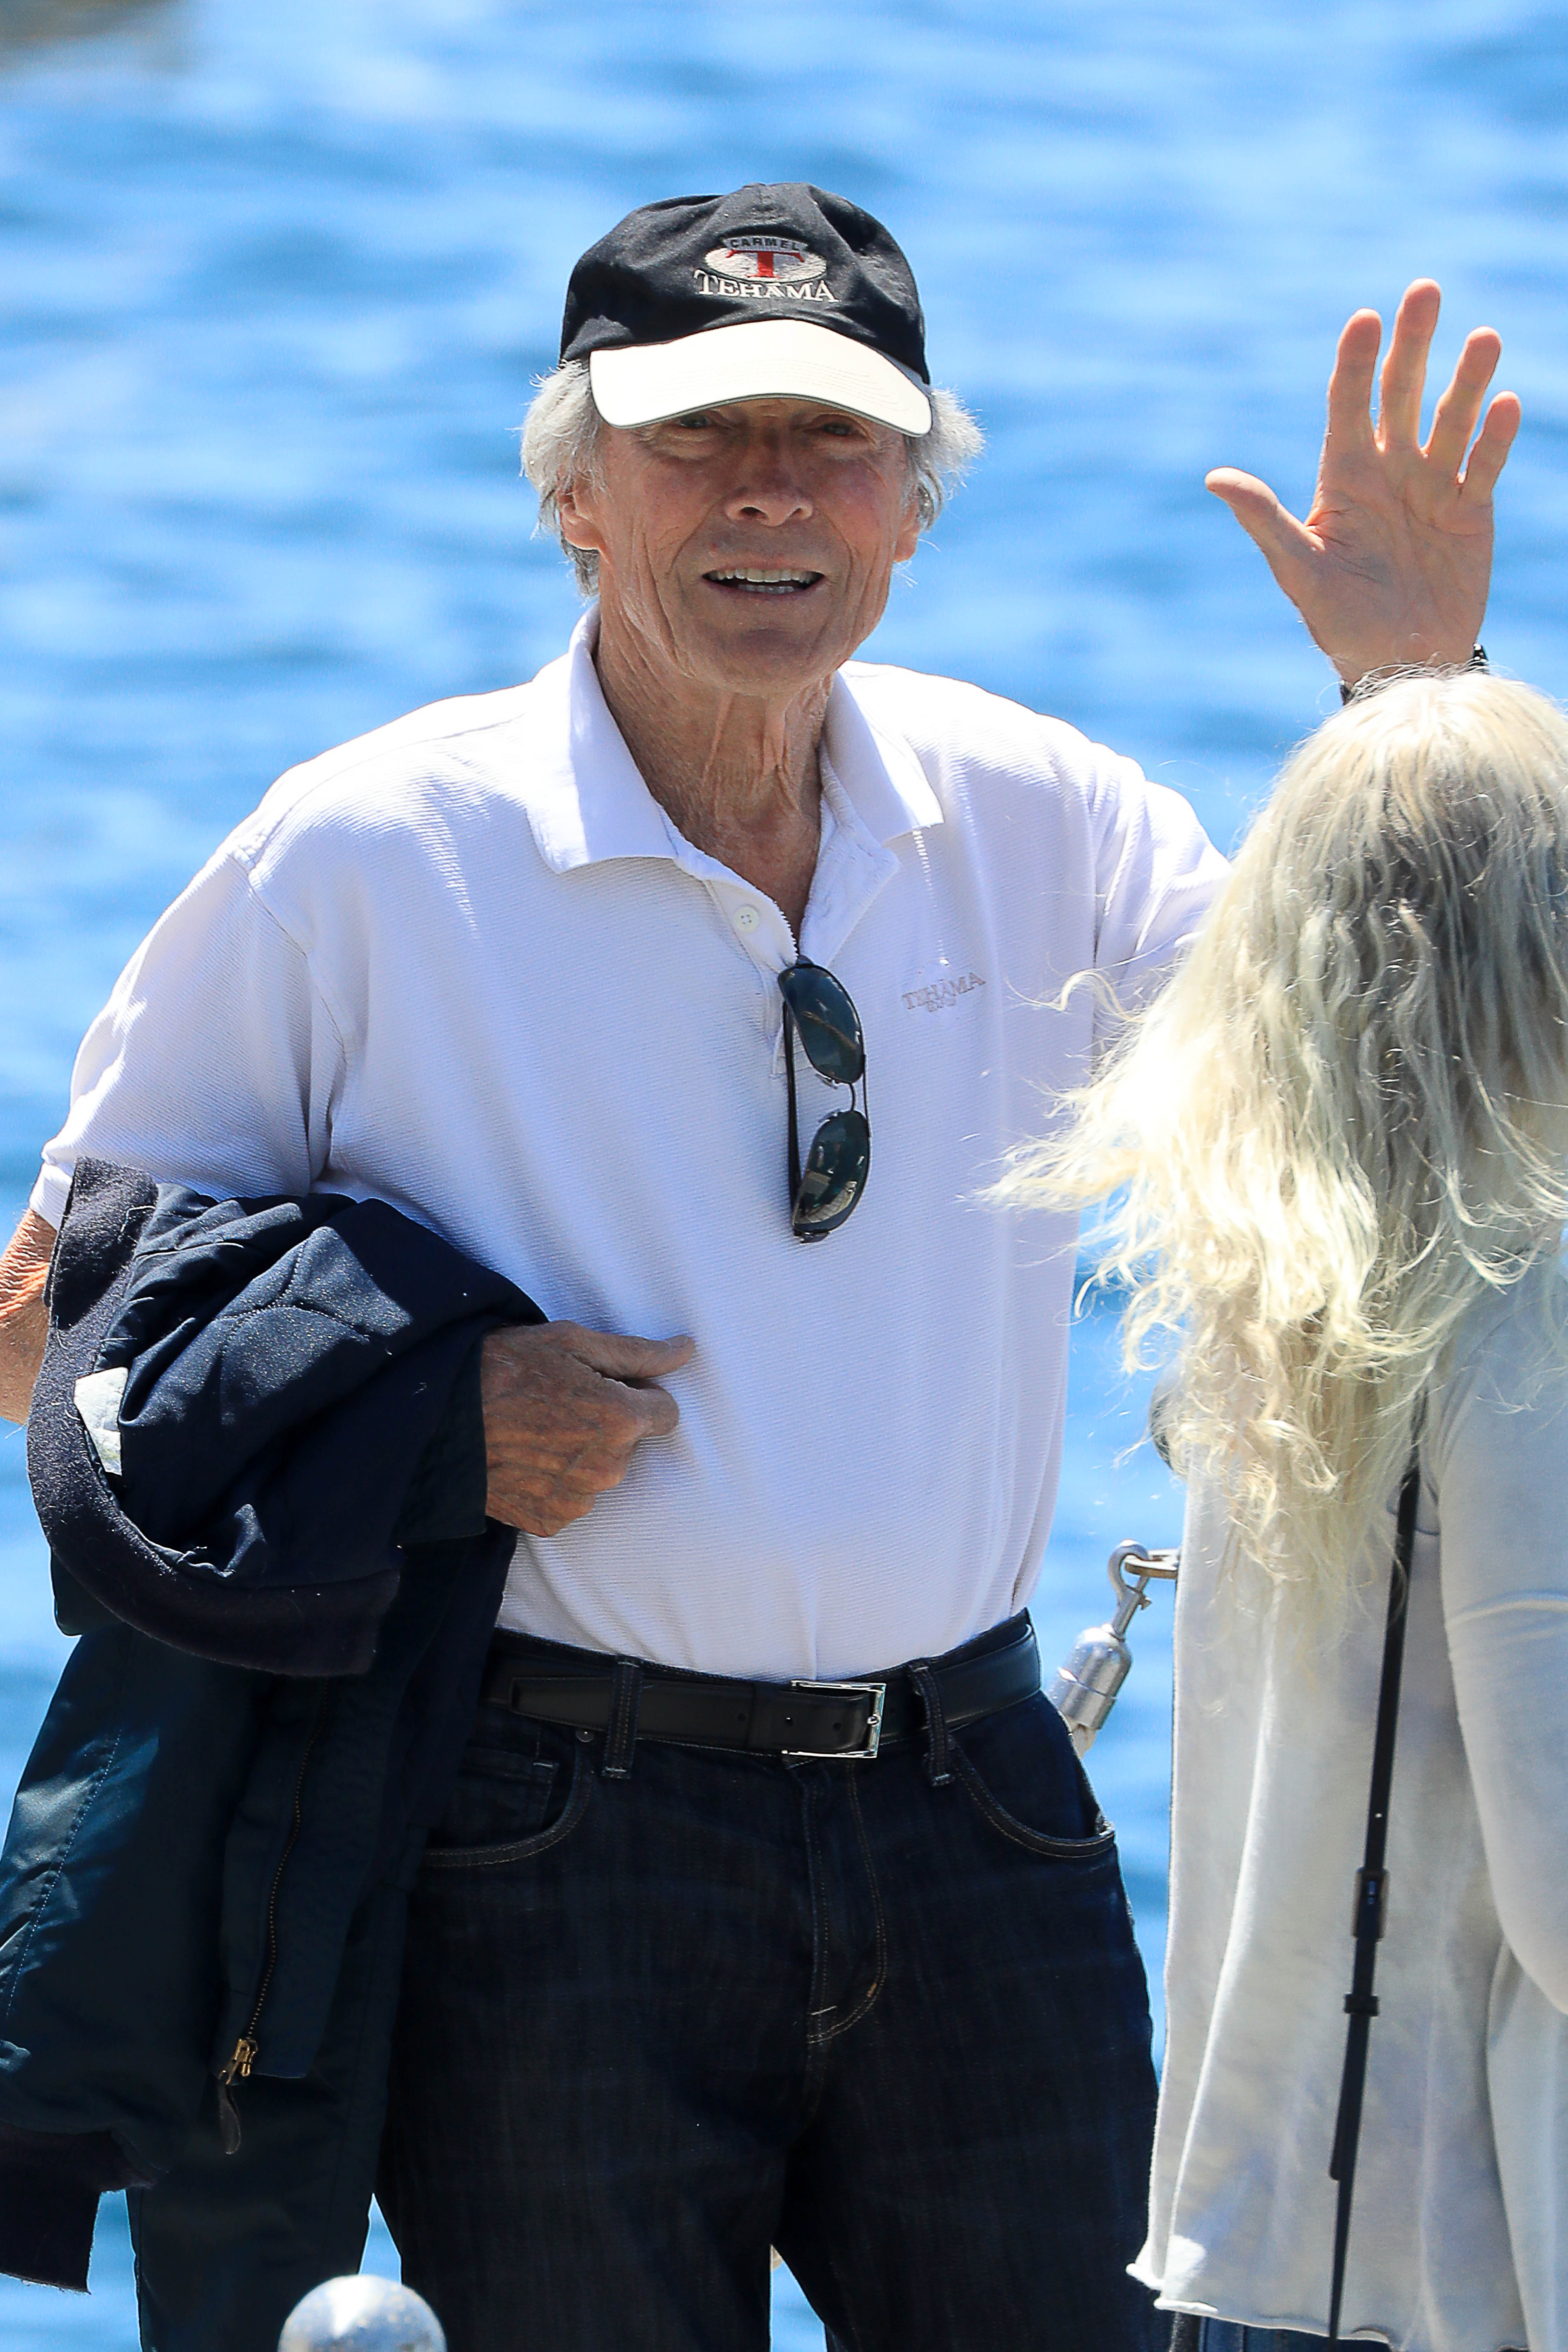 Clint Eastwood is spotted during the 70th annual Cannes Film Festival in Cannes, France, on May 21, 2017. | Source: Getty Images